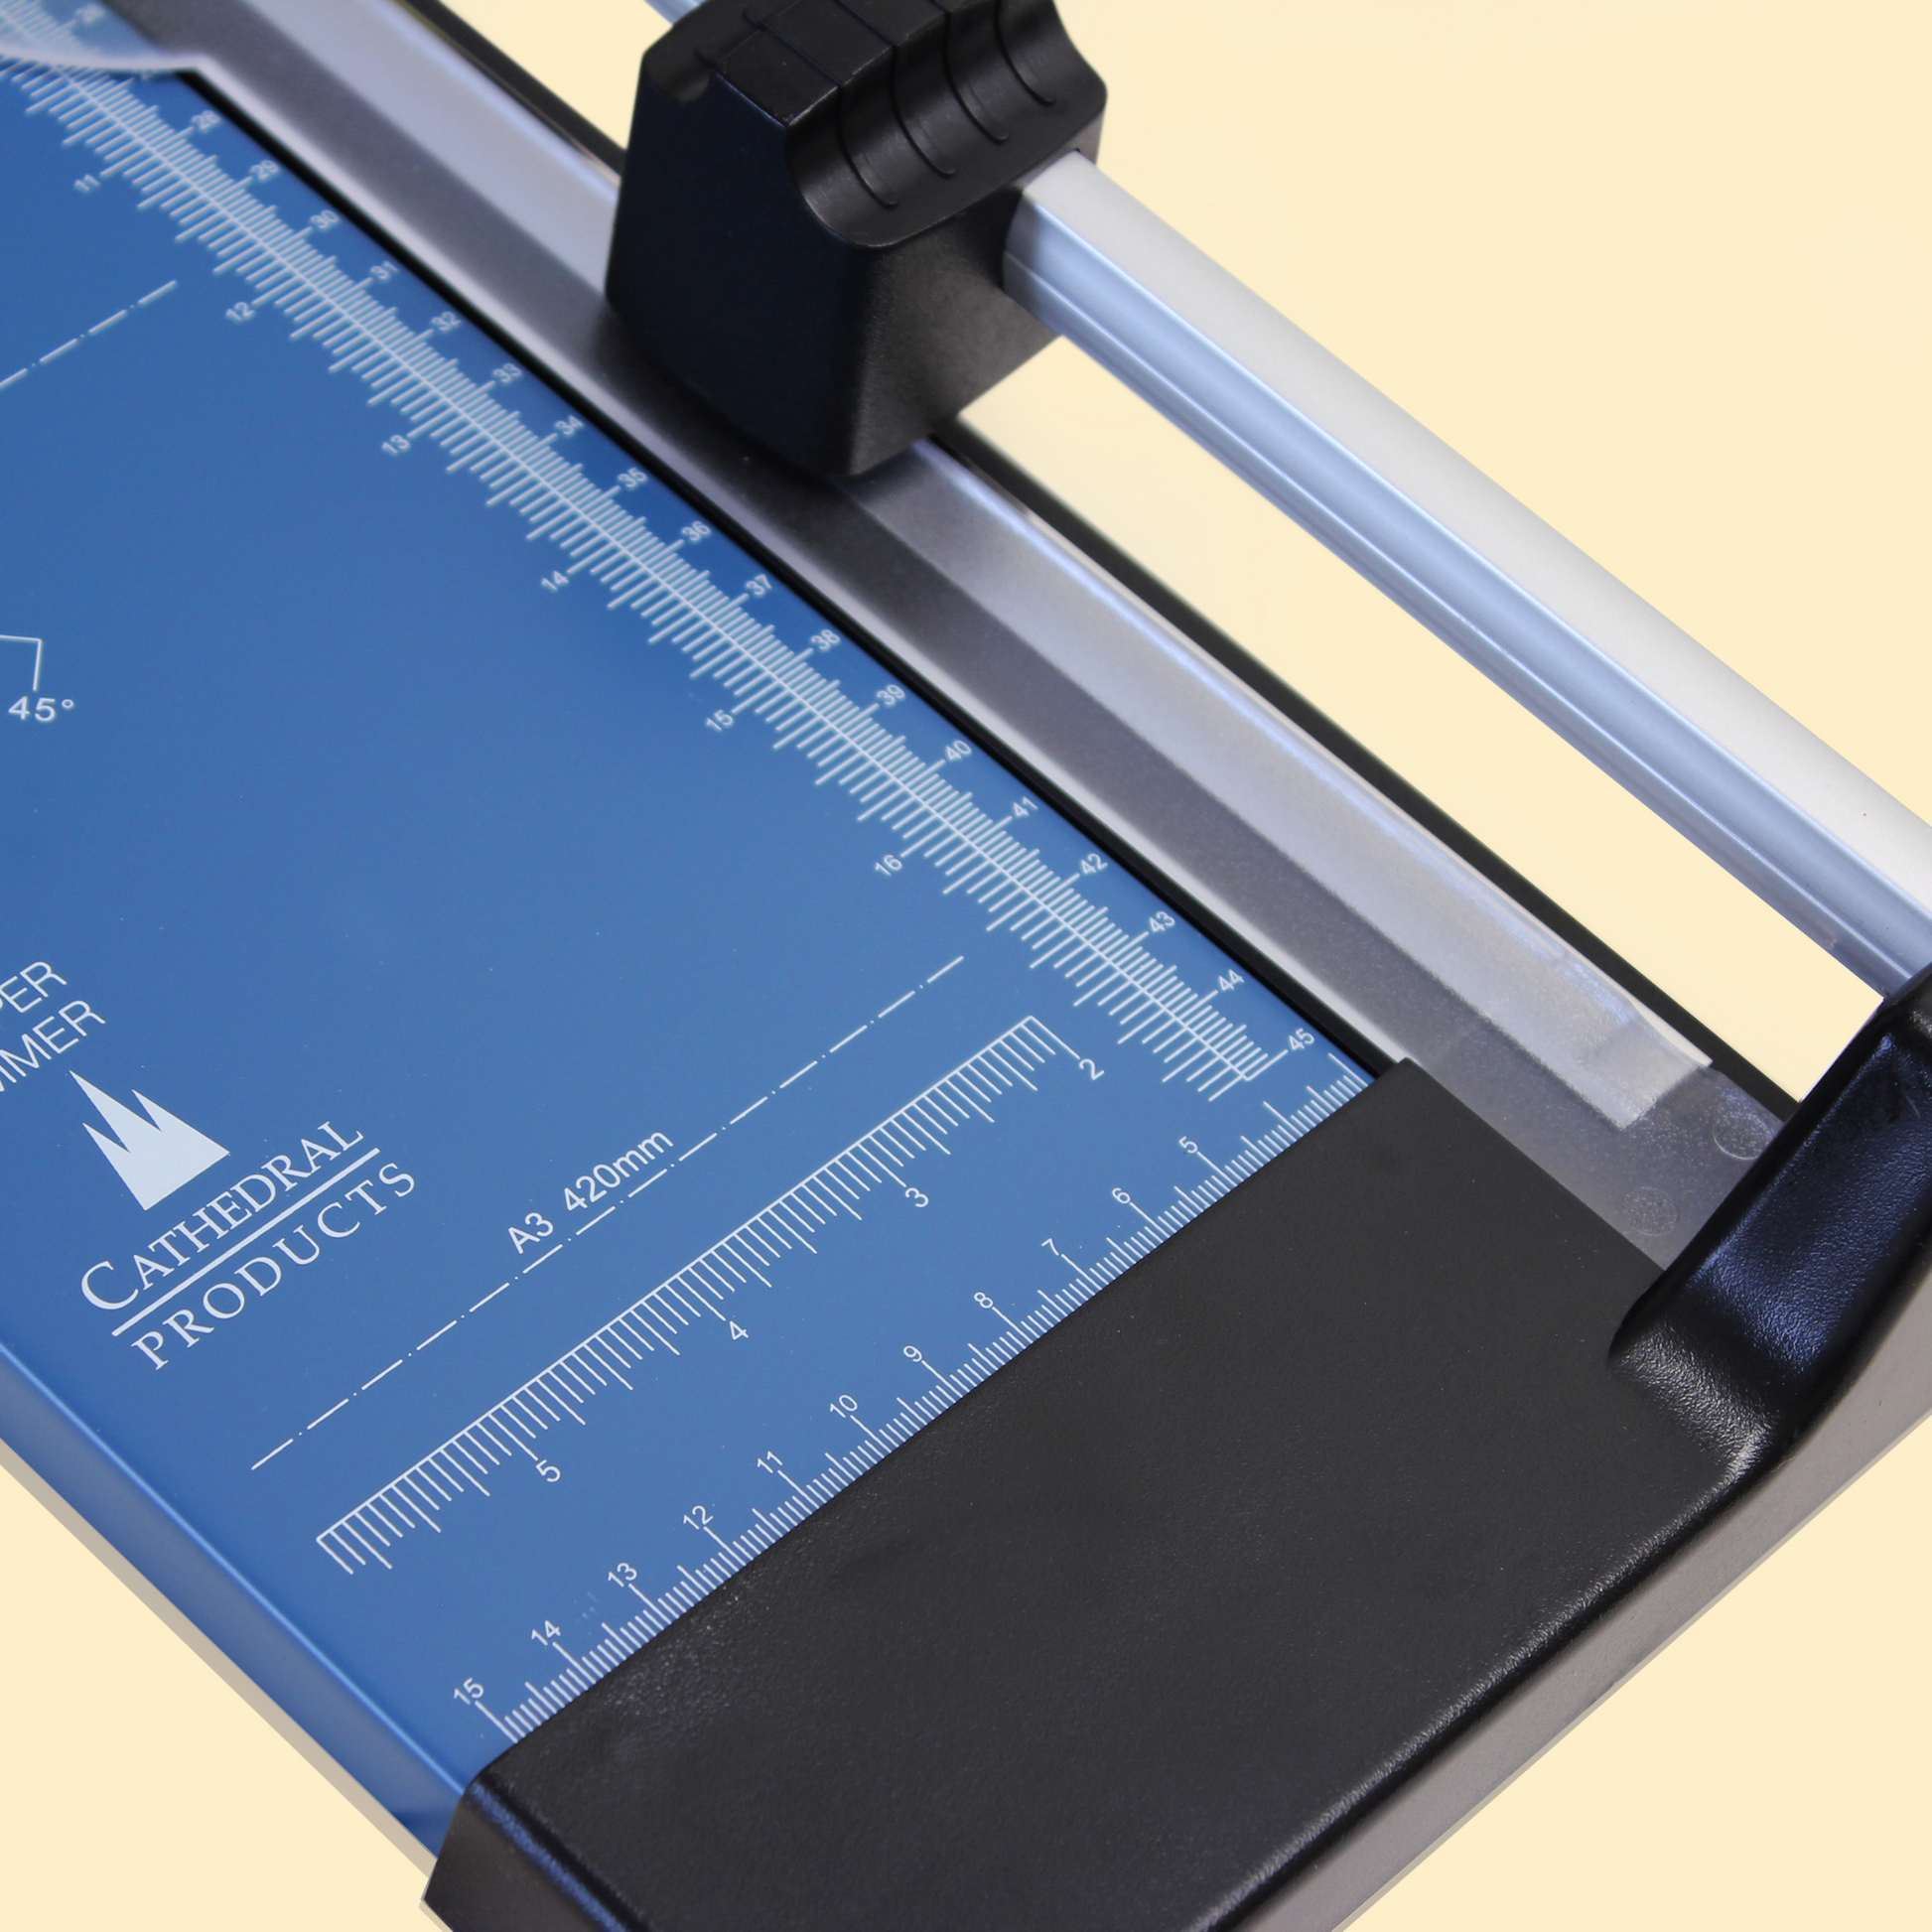 Zoomed-in view of the measurement details on the blue metal base of a Cathedral Products A4 rotary paper trimmer, highlighting the precise calibration for various paper sizes and angled cuts.